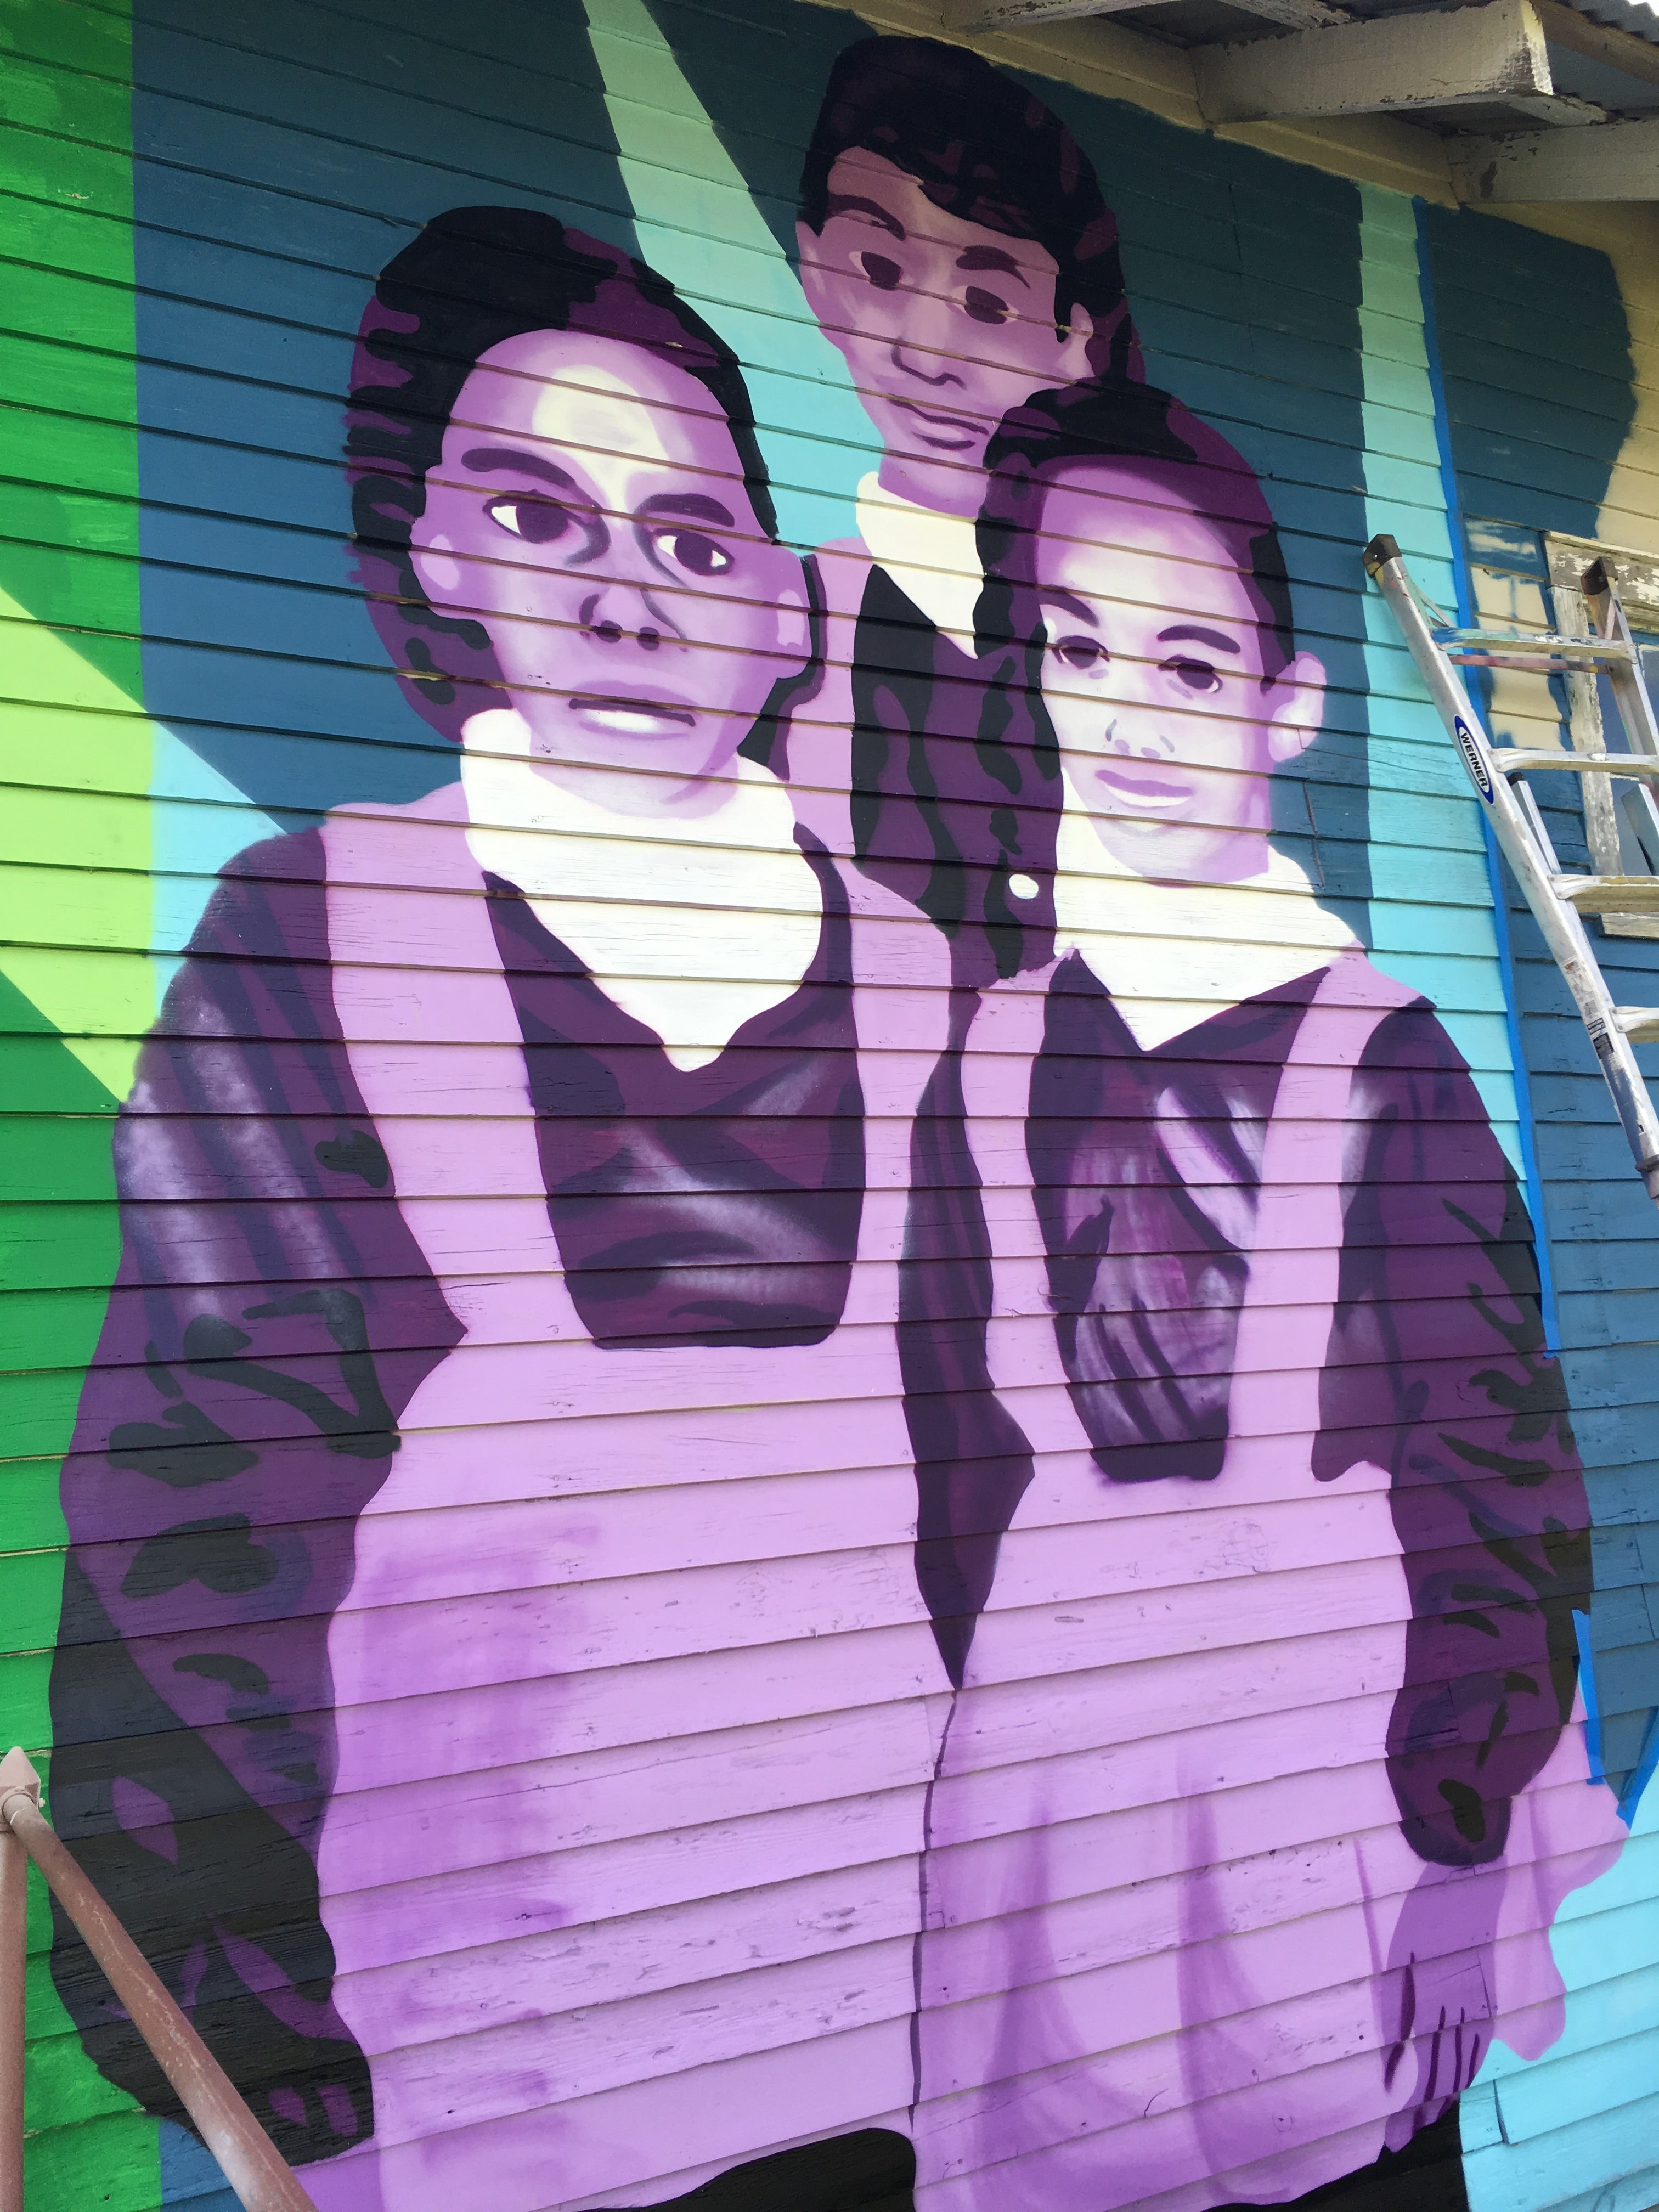 Three Girls in the Mural